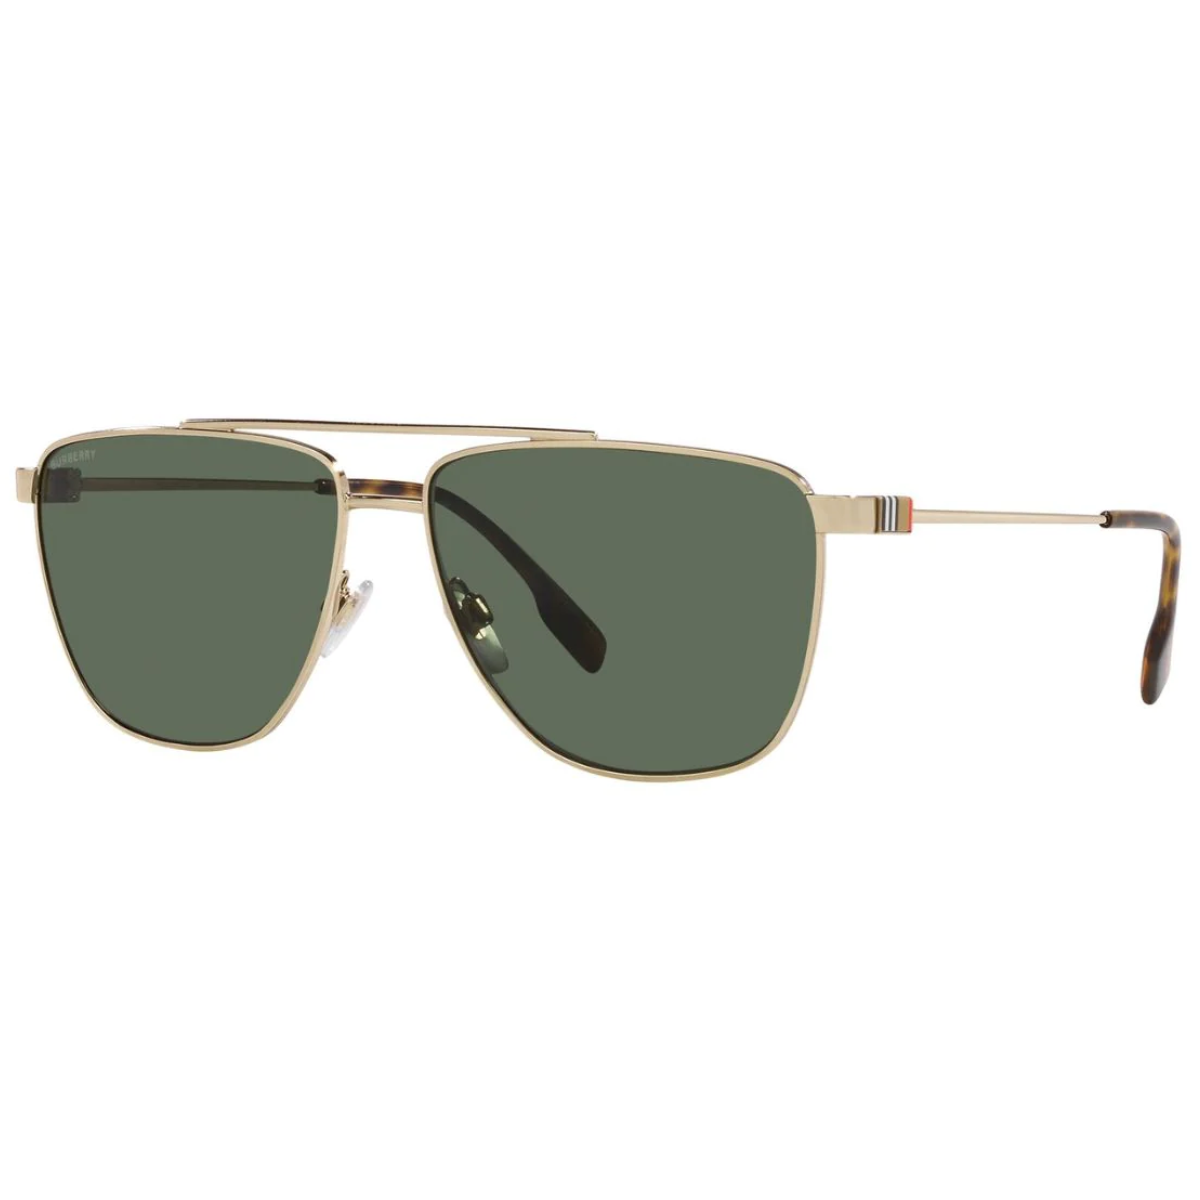 "Elevate your look with Burberry 3141 Sunglass for men at Optorium: Find the perfect pair of stylish sunglasses for any outfit."